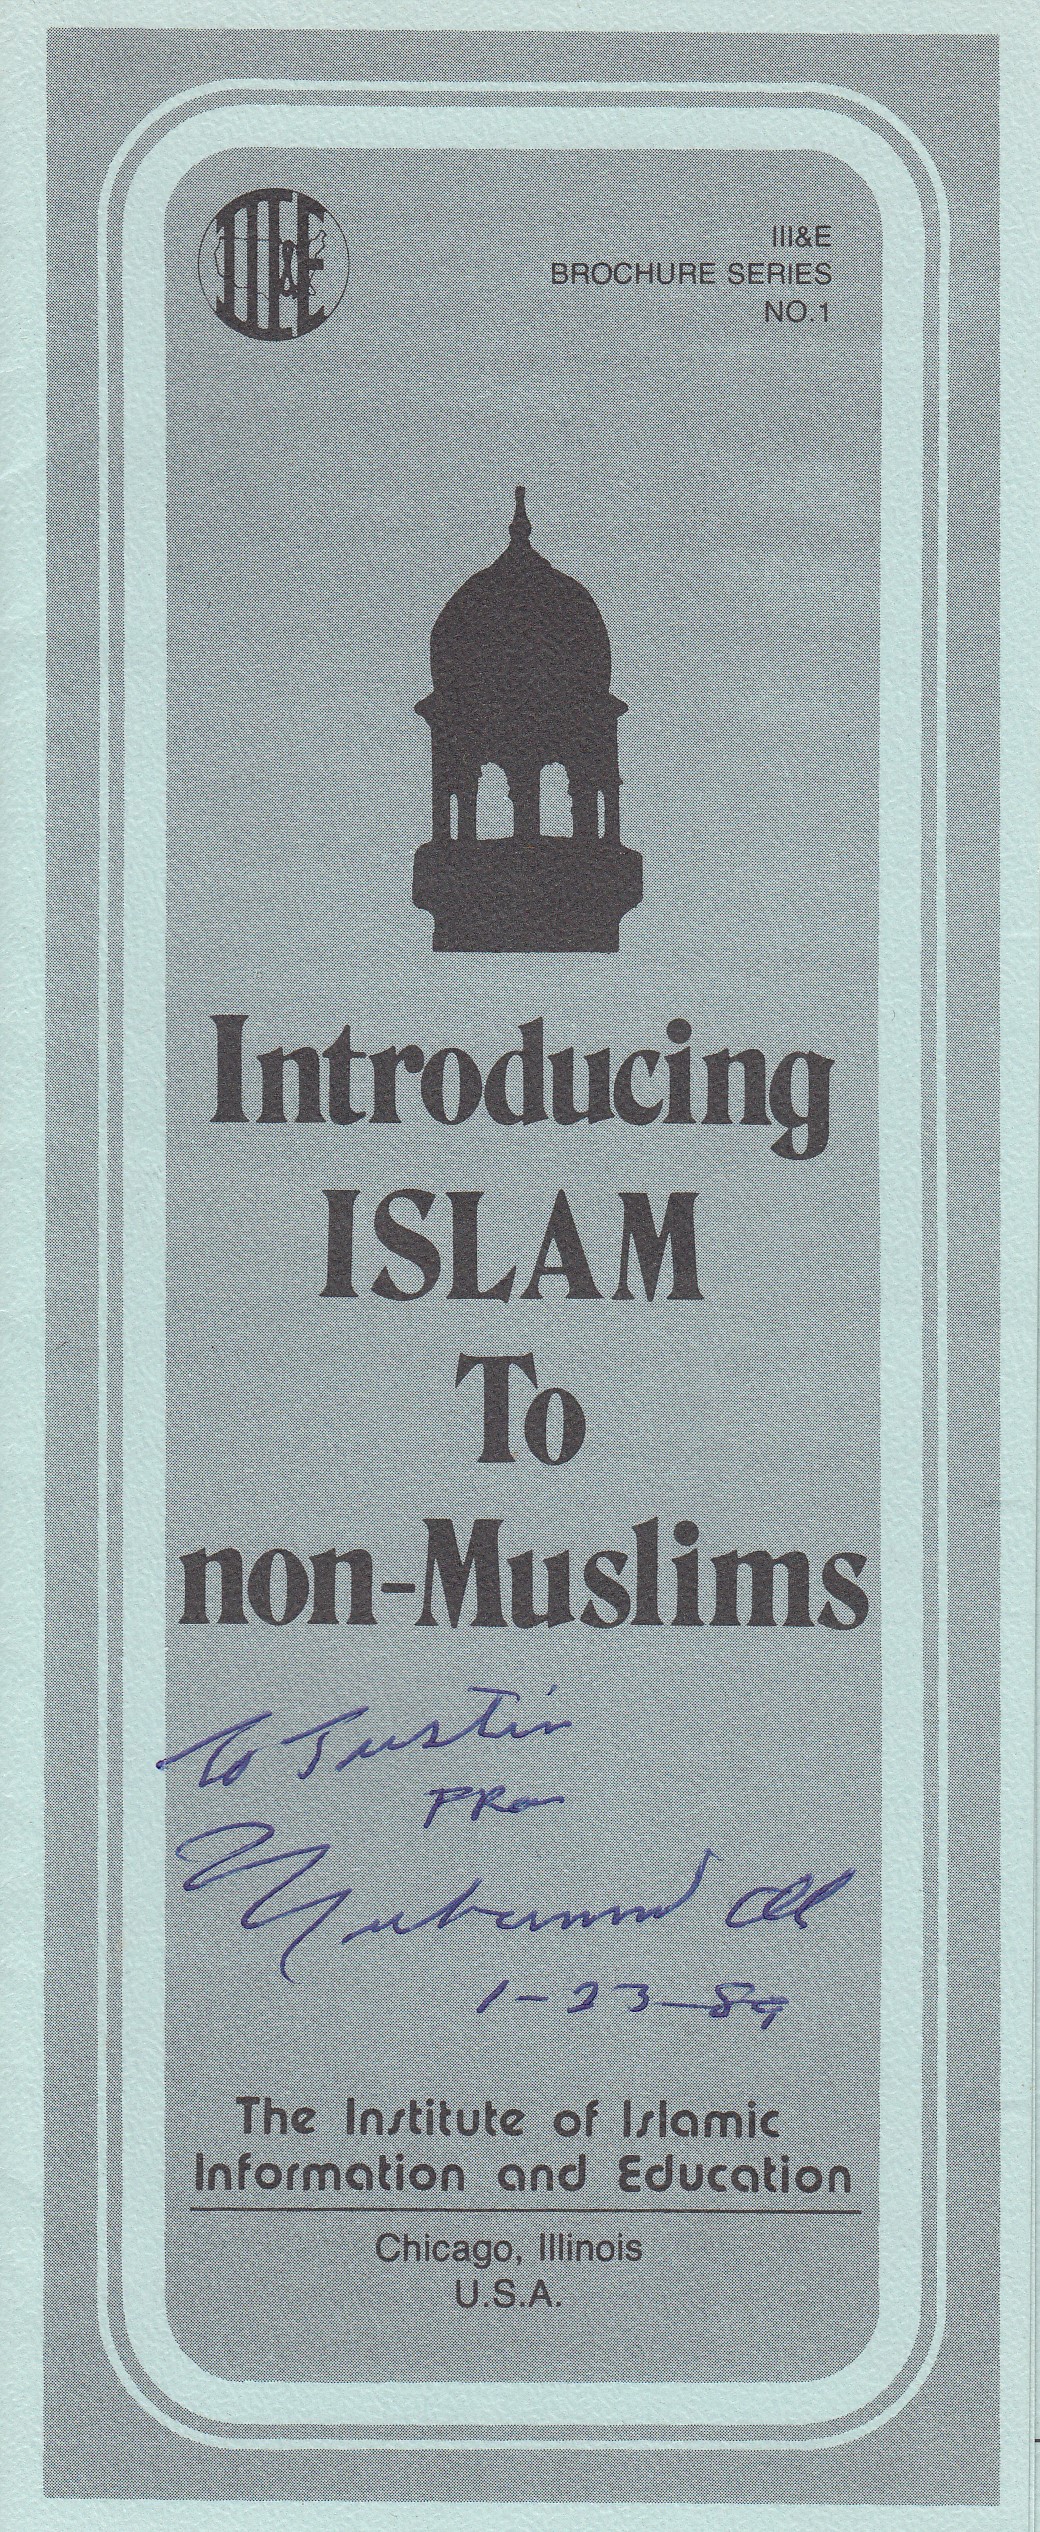 MUHAMMAD ALI AUTOGRAPH A fold-out pamphlet Introducing Islam to non-Muslims. On the front Ali has